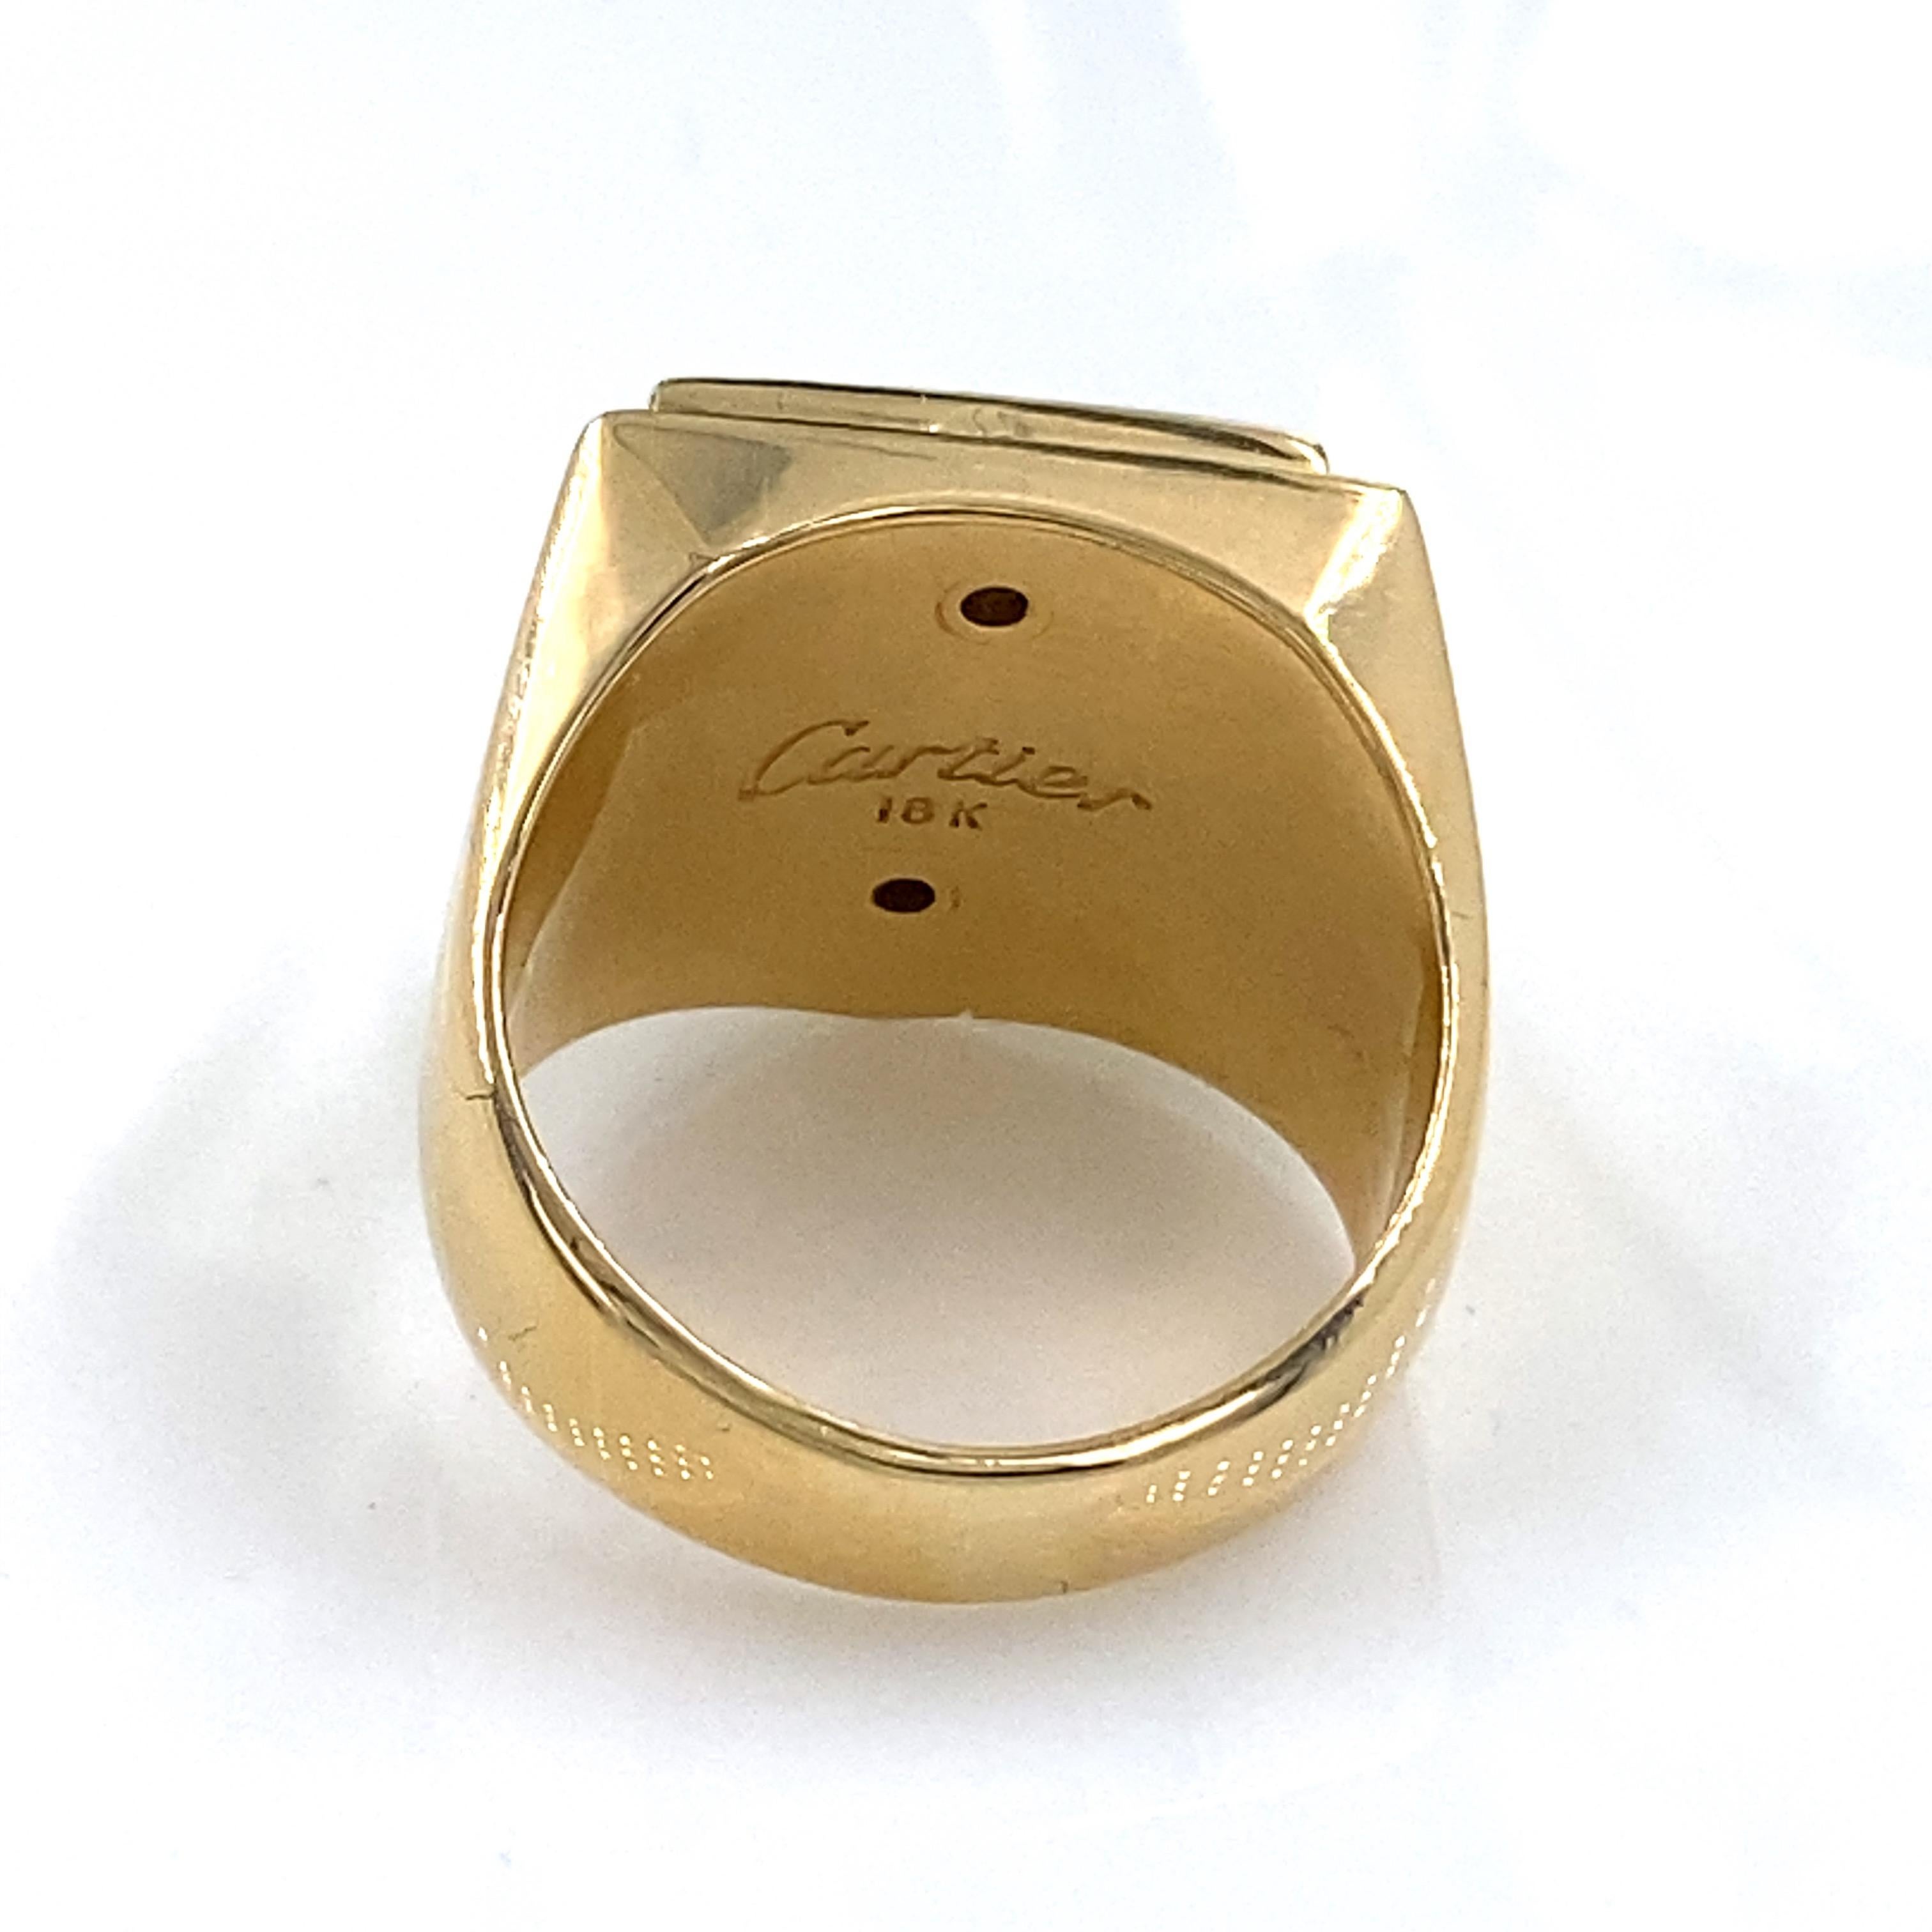 Cartier Vintage 1985 Lincoln Mercury Merkur Diamond and 18kt YG Signet Ring For Sale 2